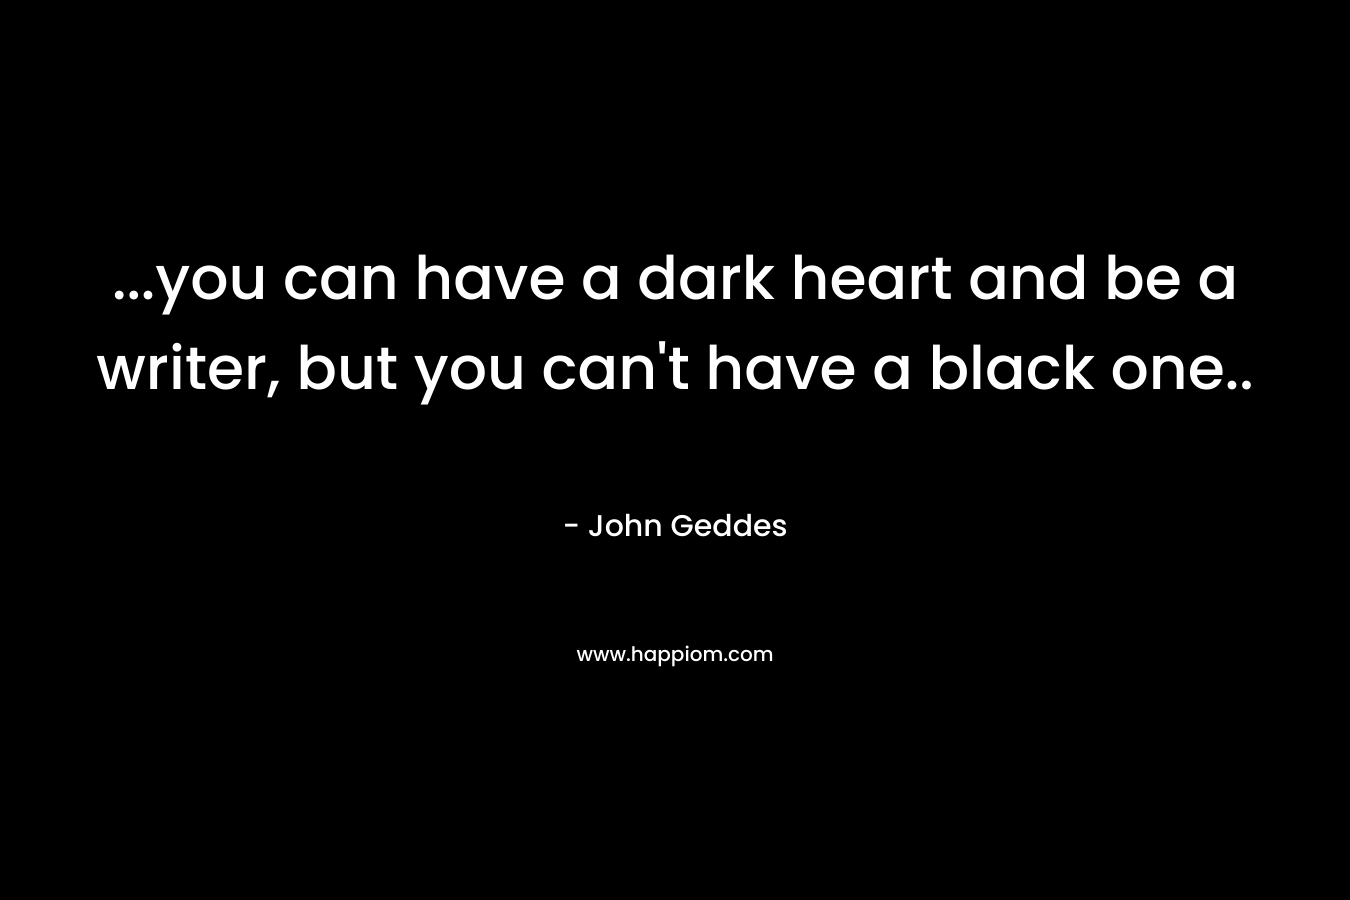 ...you can have a dark heart and be a writer, but you can't have a black one..